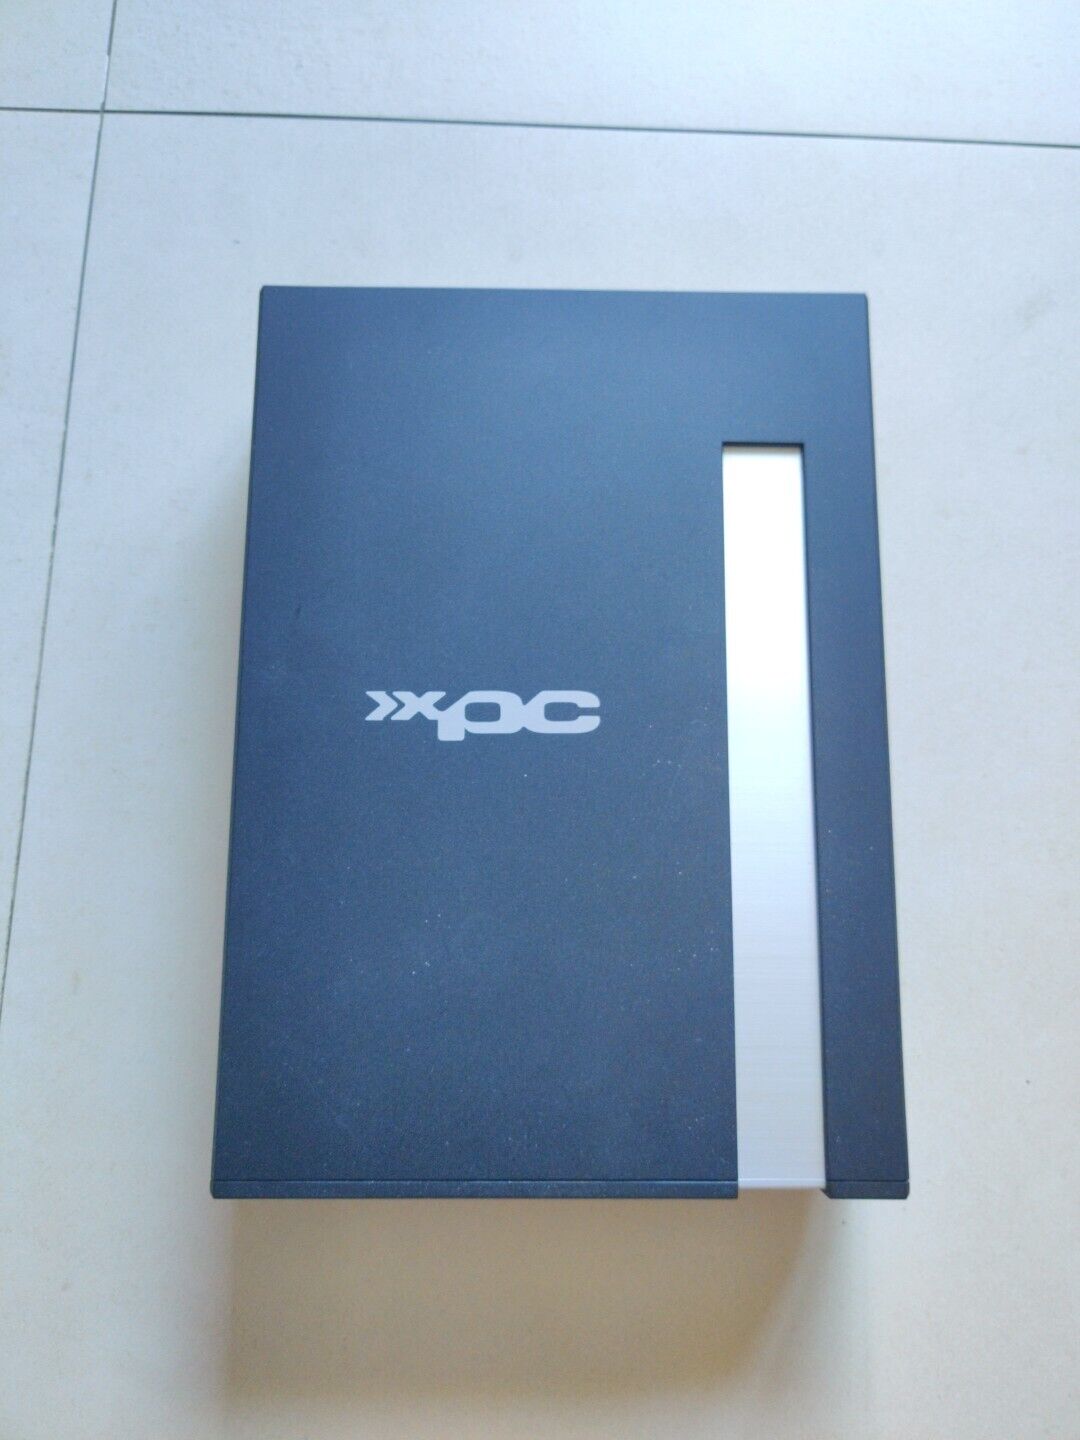 Shuttle xpc X100 Used Fast Shipping 